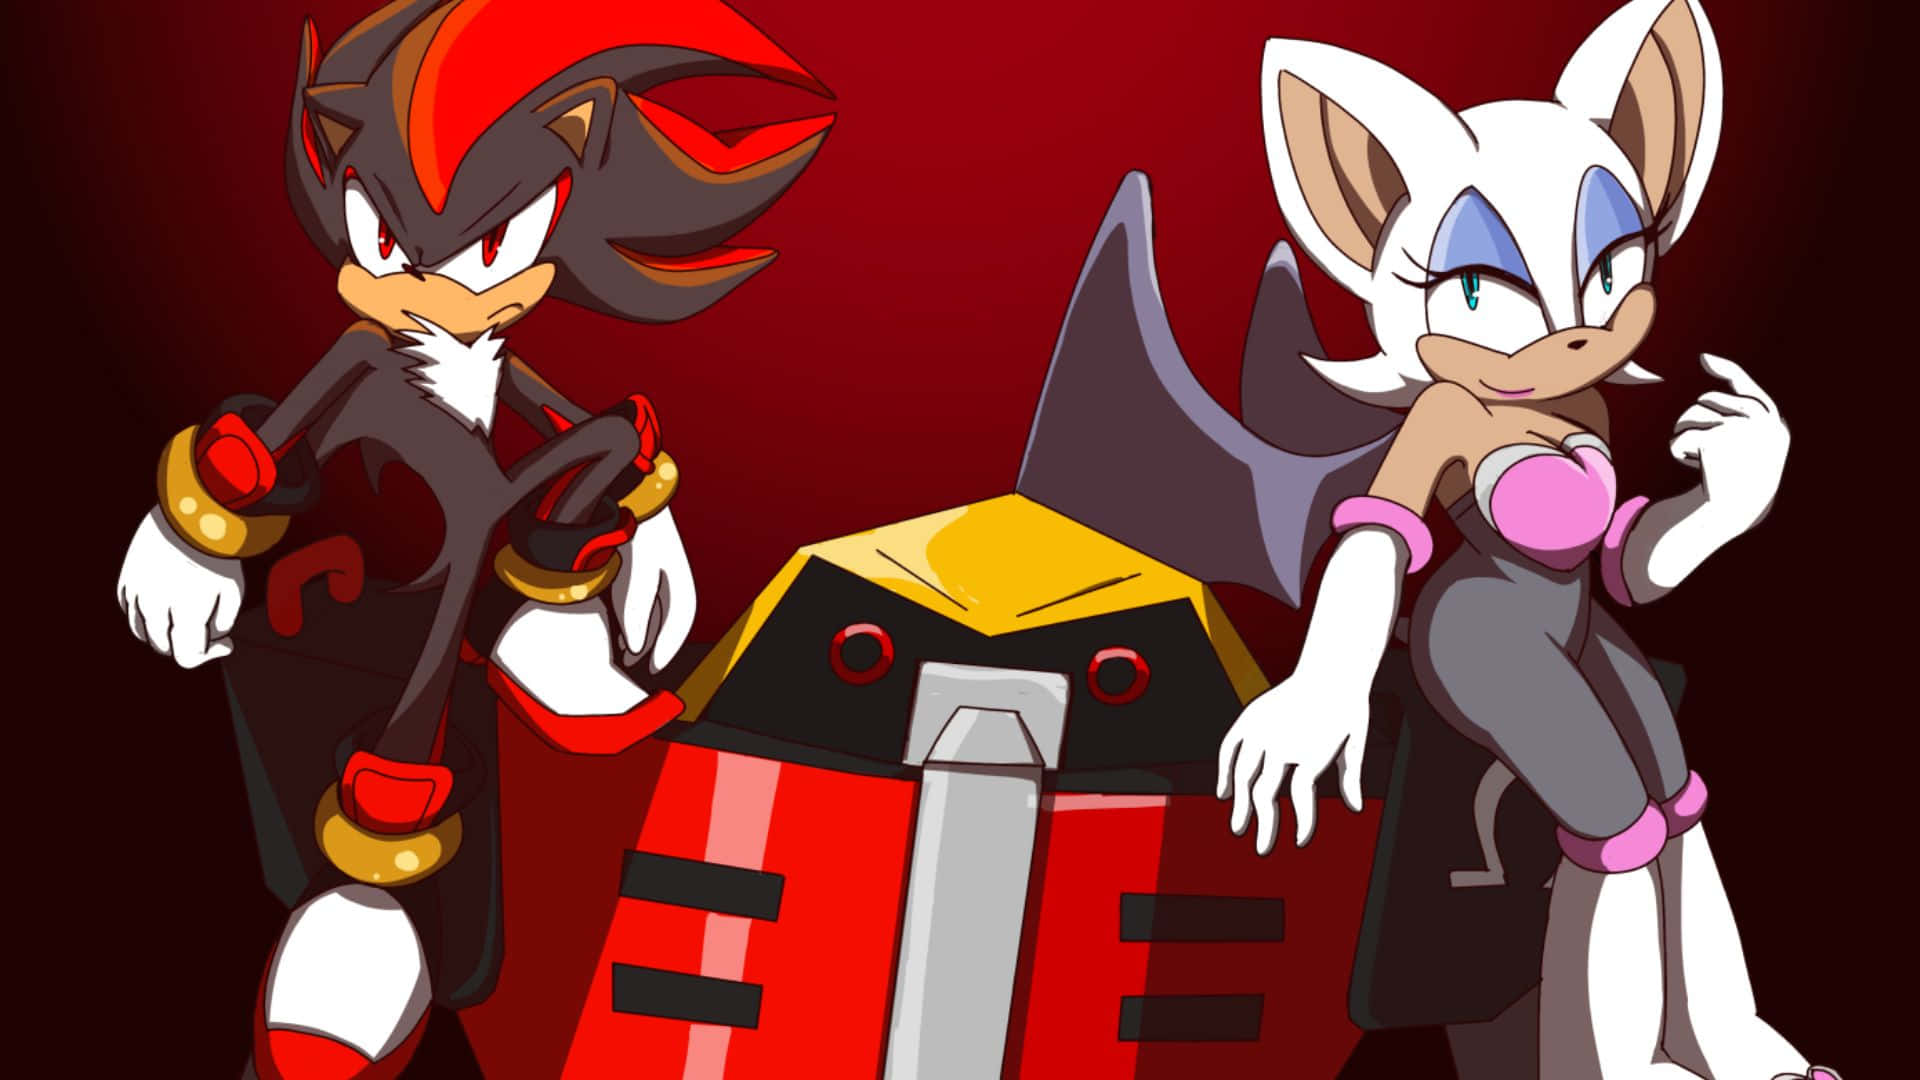 Rouge the Bat striking a pose in Sonic the Hedgehog universe Wallpaper